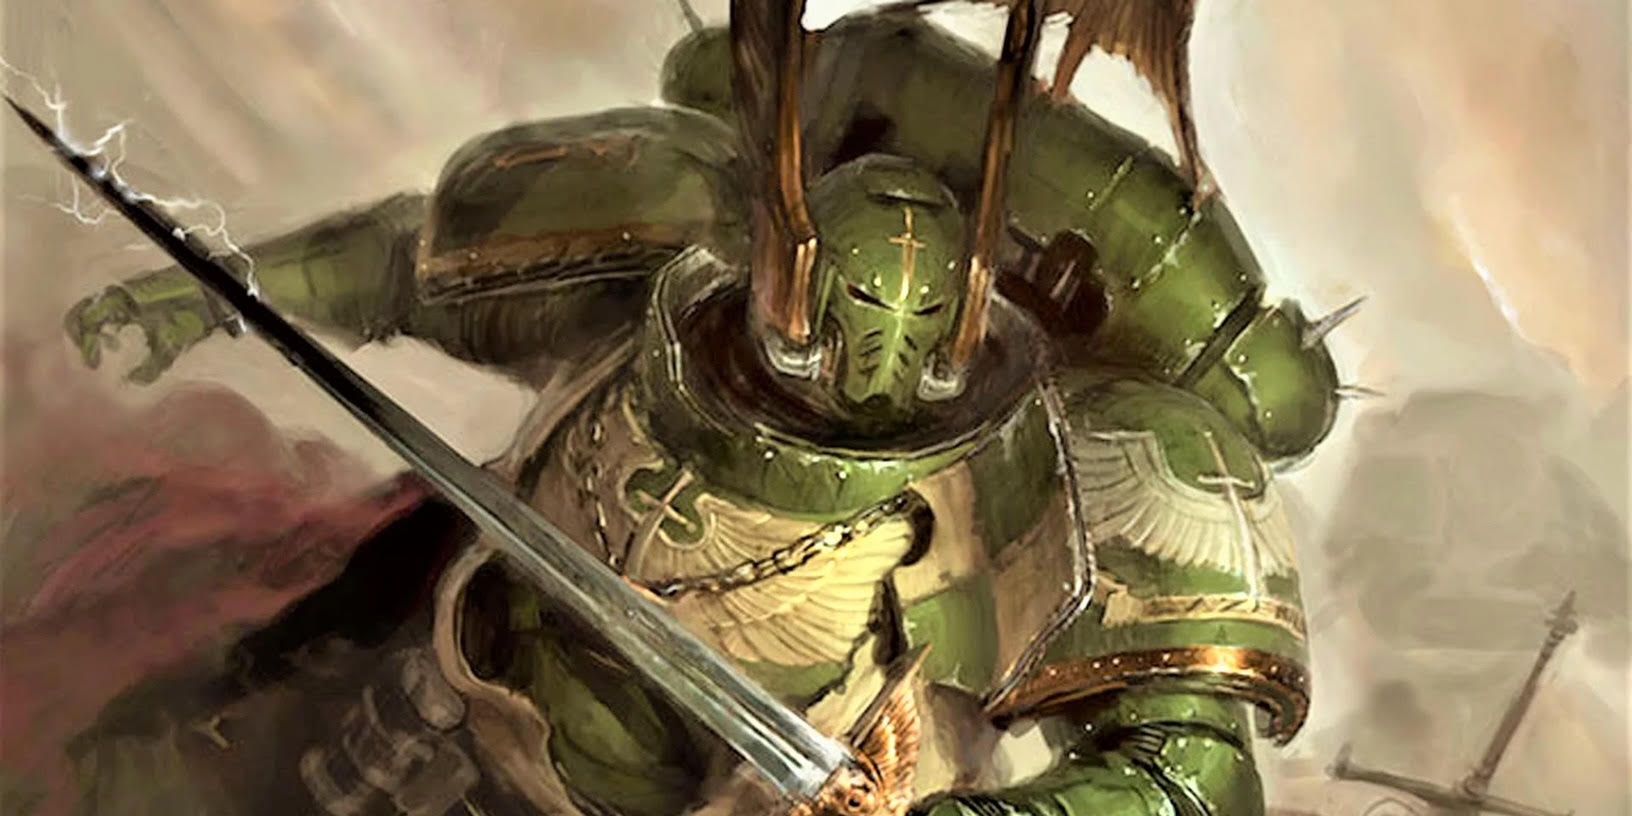 A Dark Angels Marine bears his sword that crackles with energy